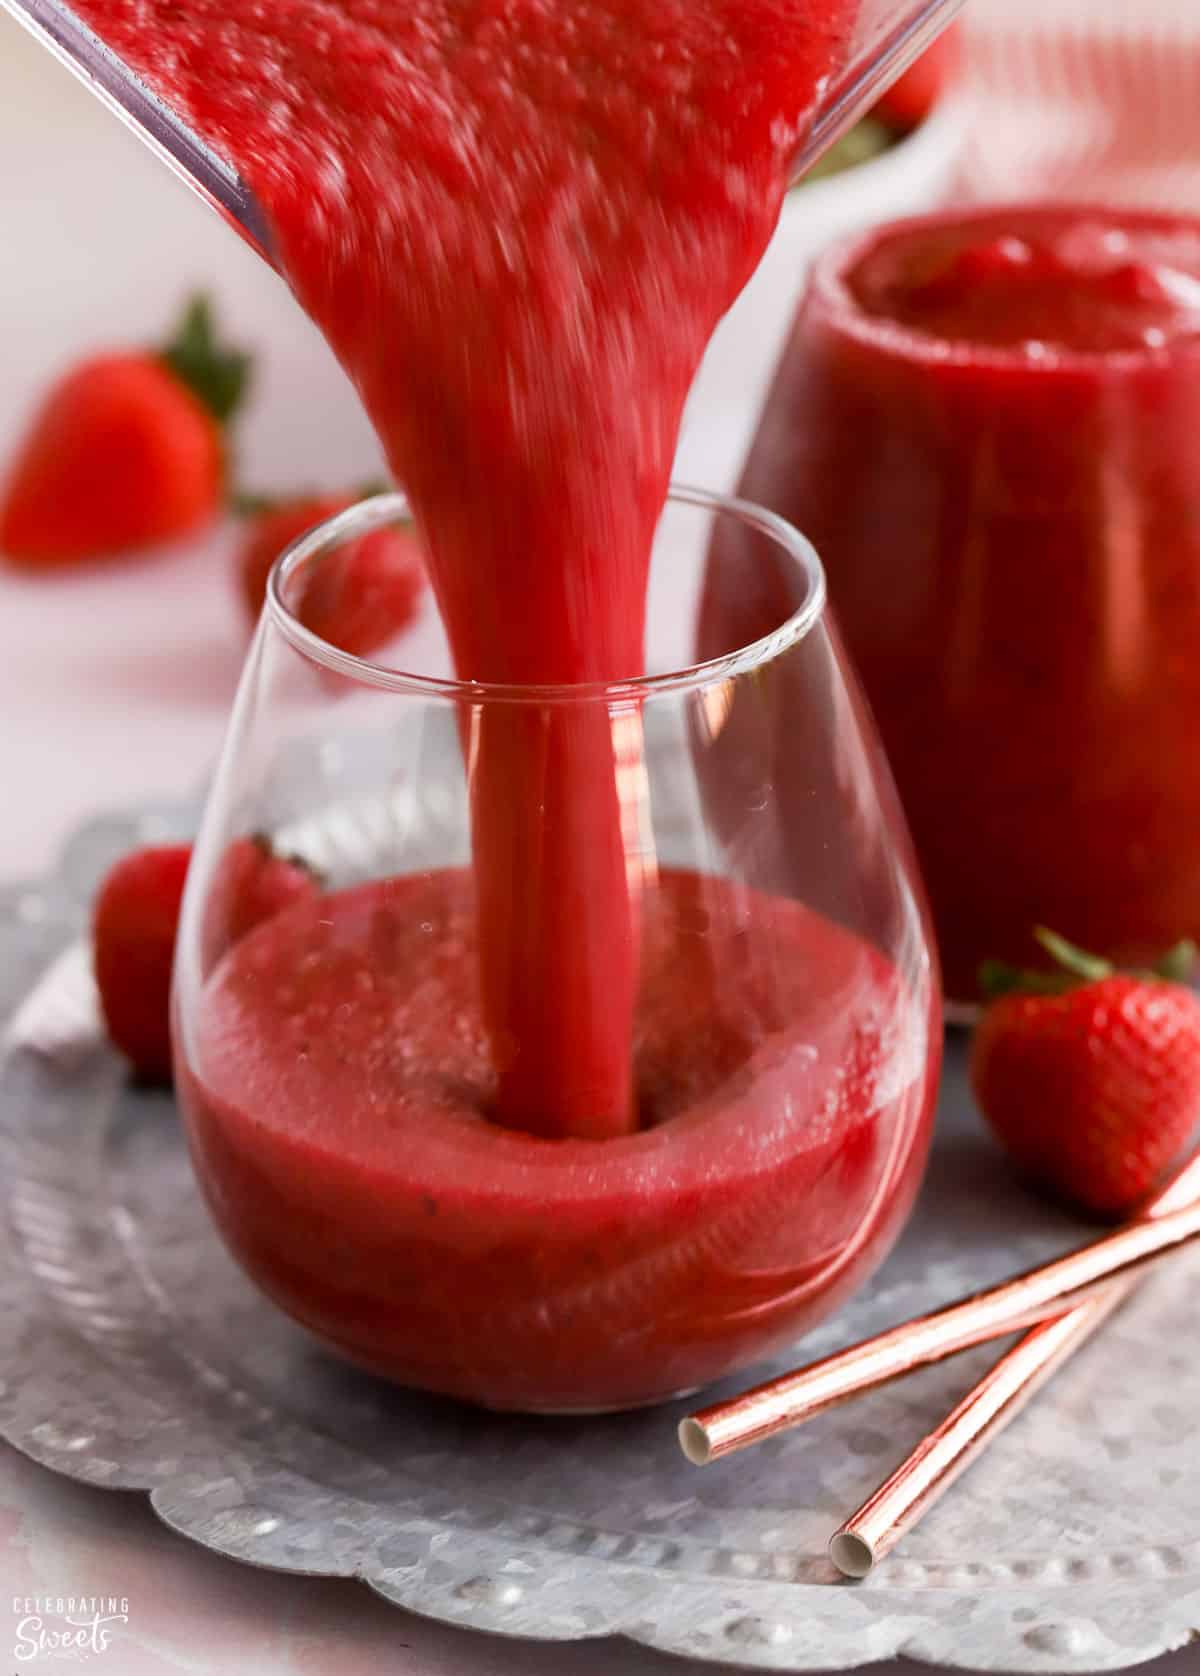 Dark red Frosé wine slushies being poured into a glass on a silver tray.